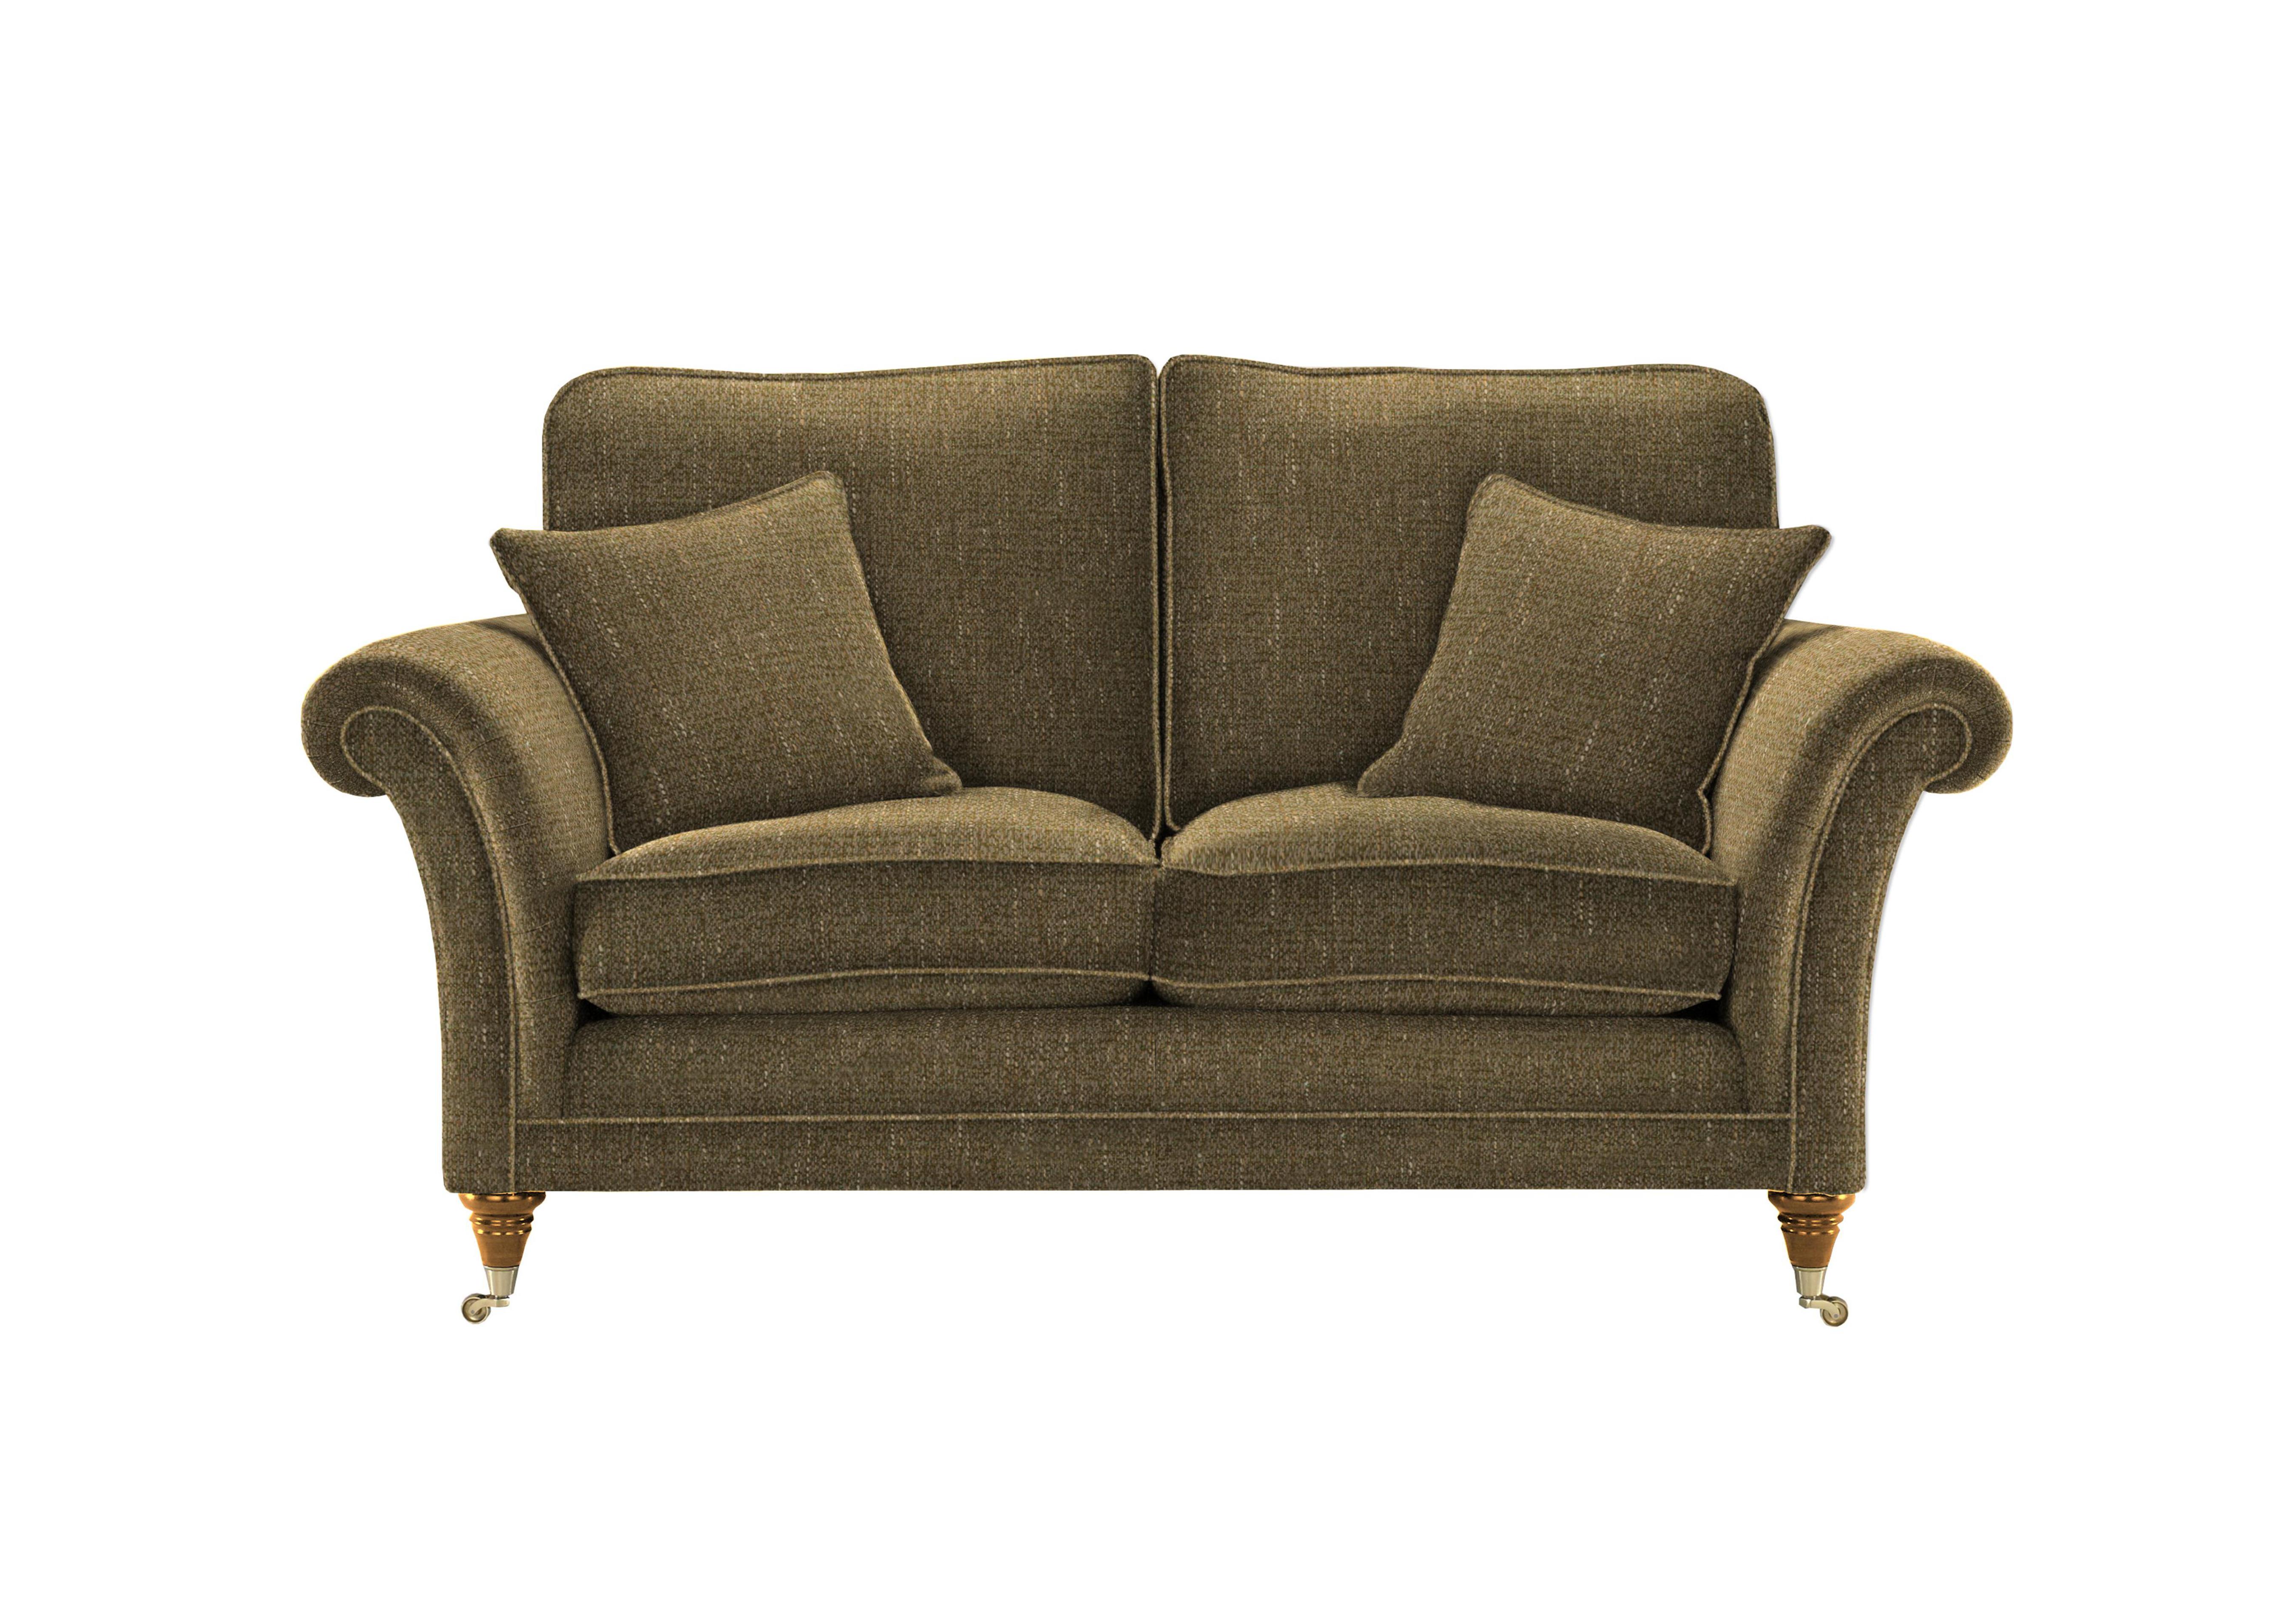 Burghley 2 Seater Fabric Sofa in 001408-0065 Country Moss on Furniture Village